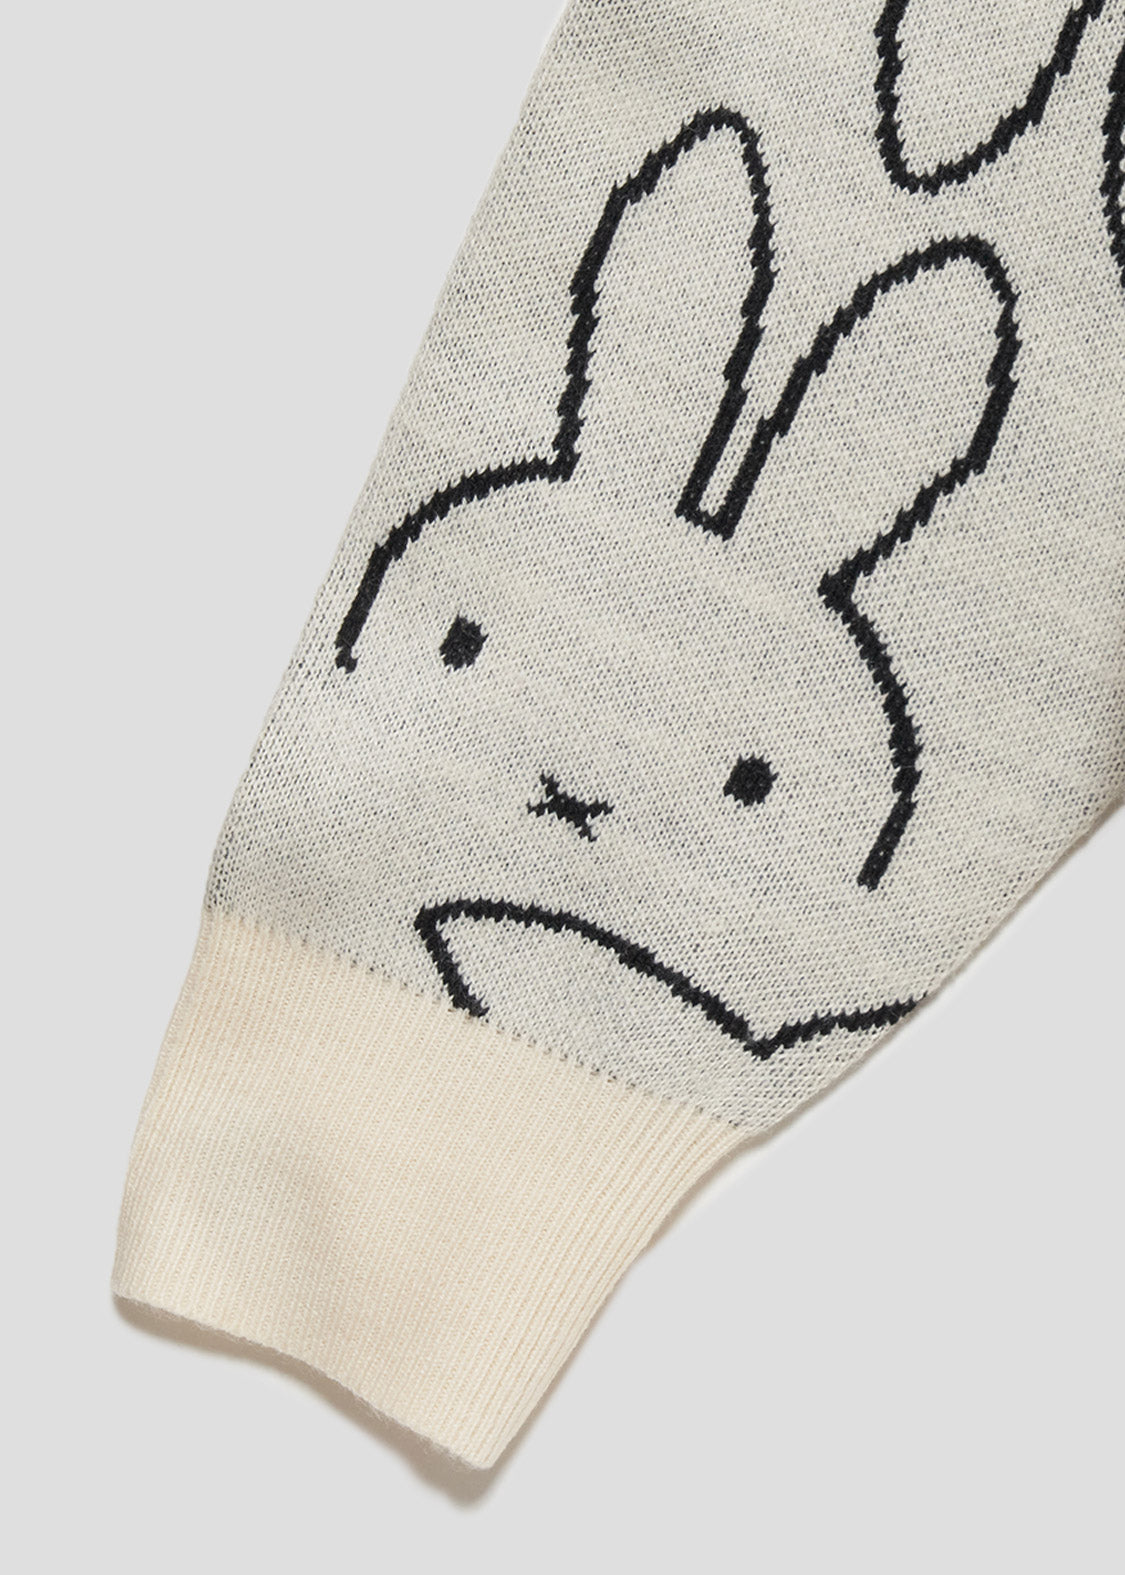 miffy Graphic Long Sleeve Knit (miffy_miffy Face)